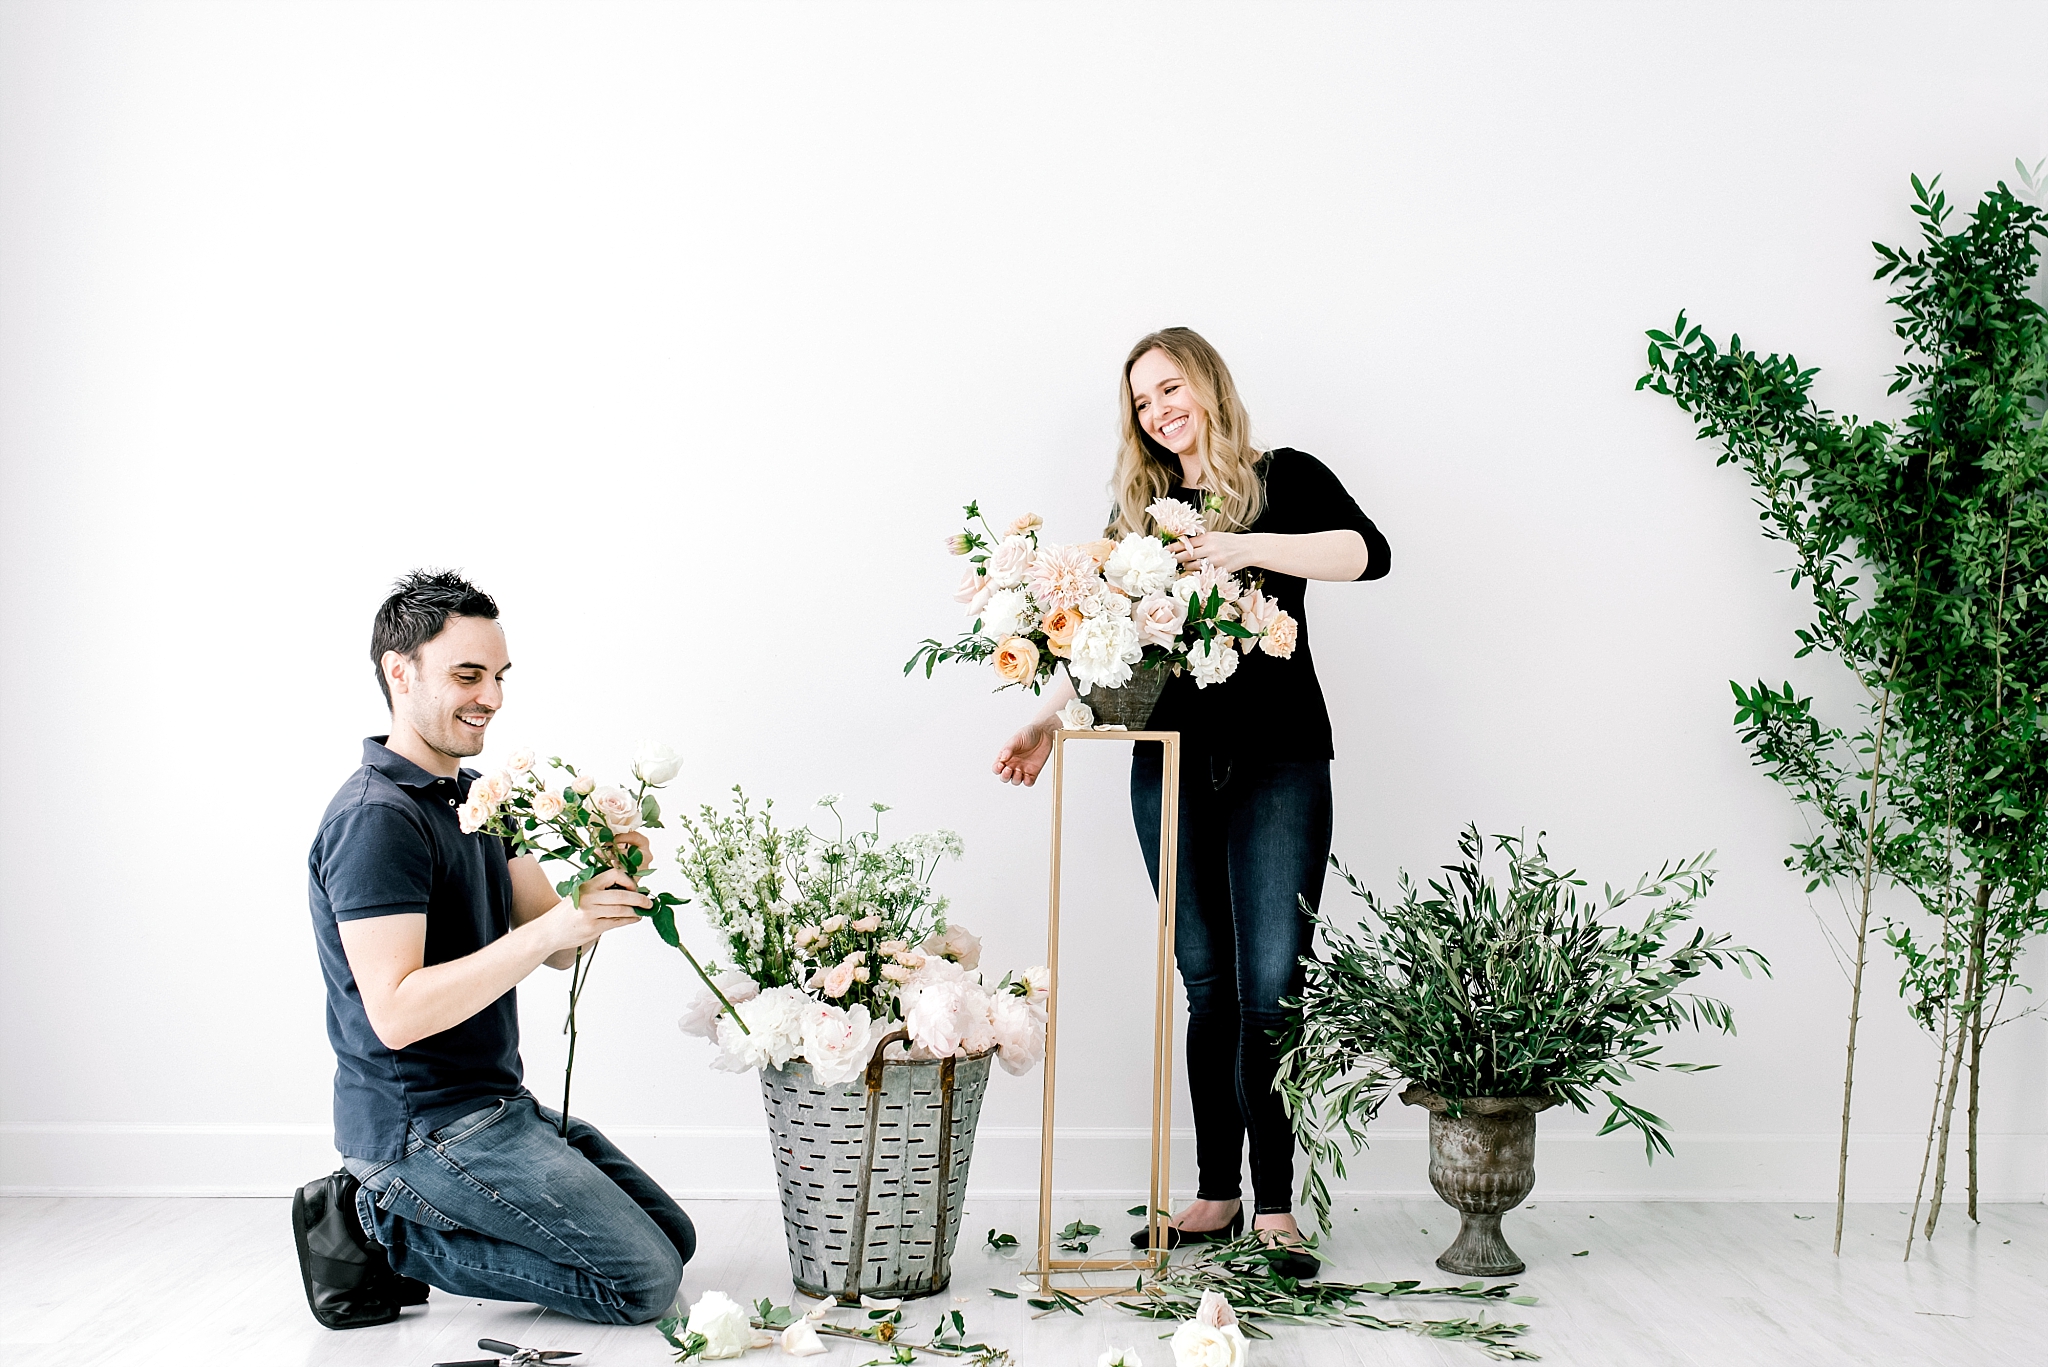 Husband and wife florist team arranging flowers